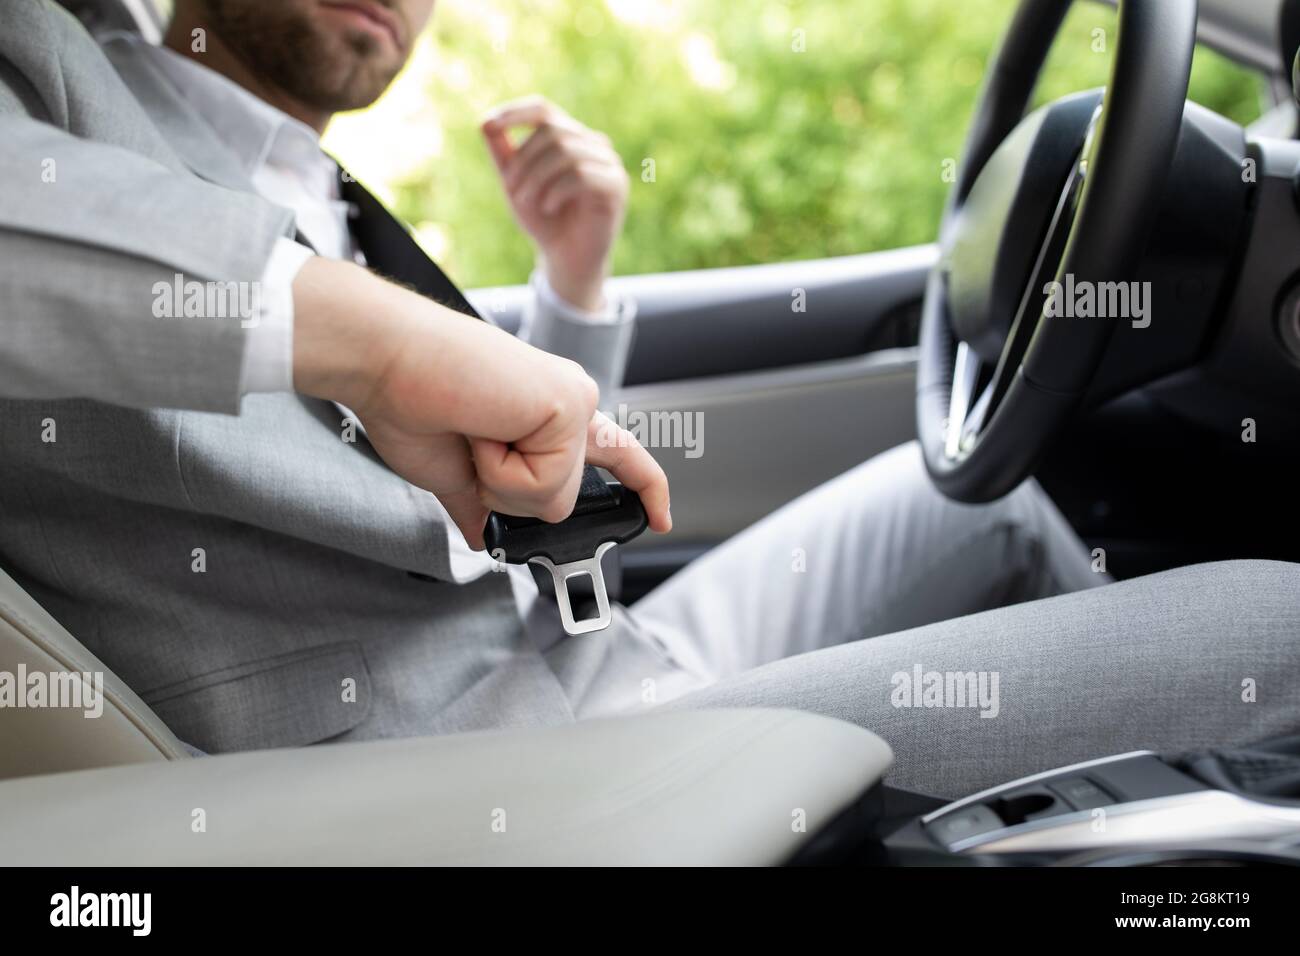 Male hand fastens seat belt in car. Buckle seat belt while sitting inside car before driving Stock Photo